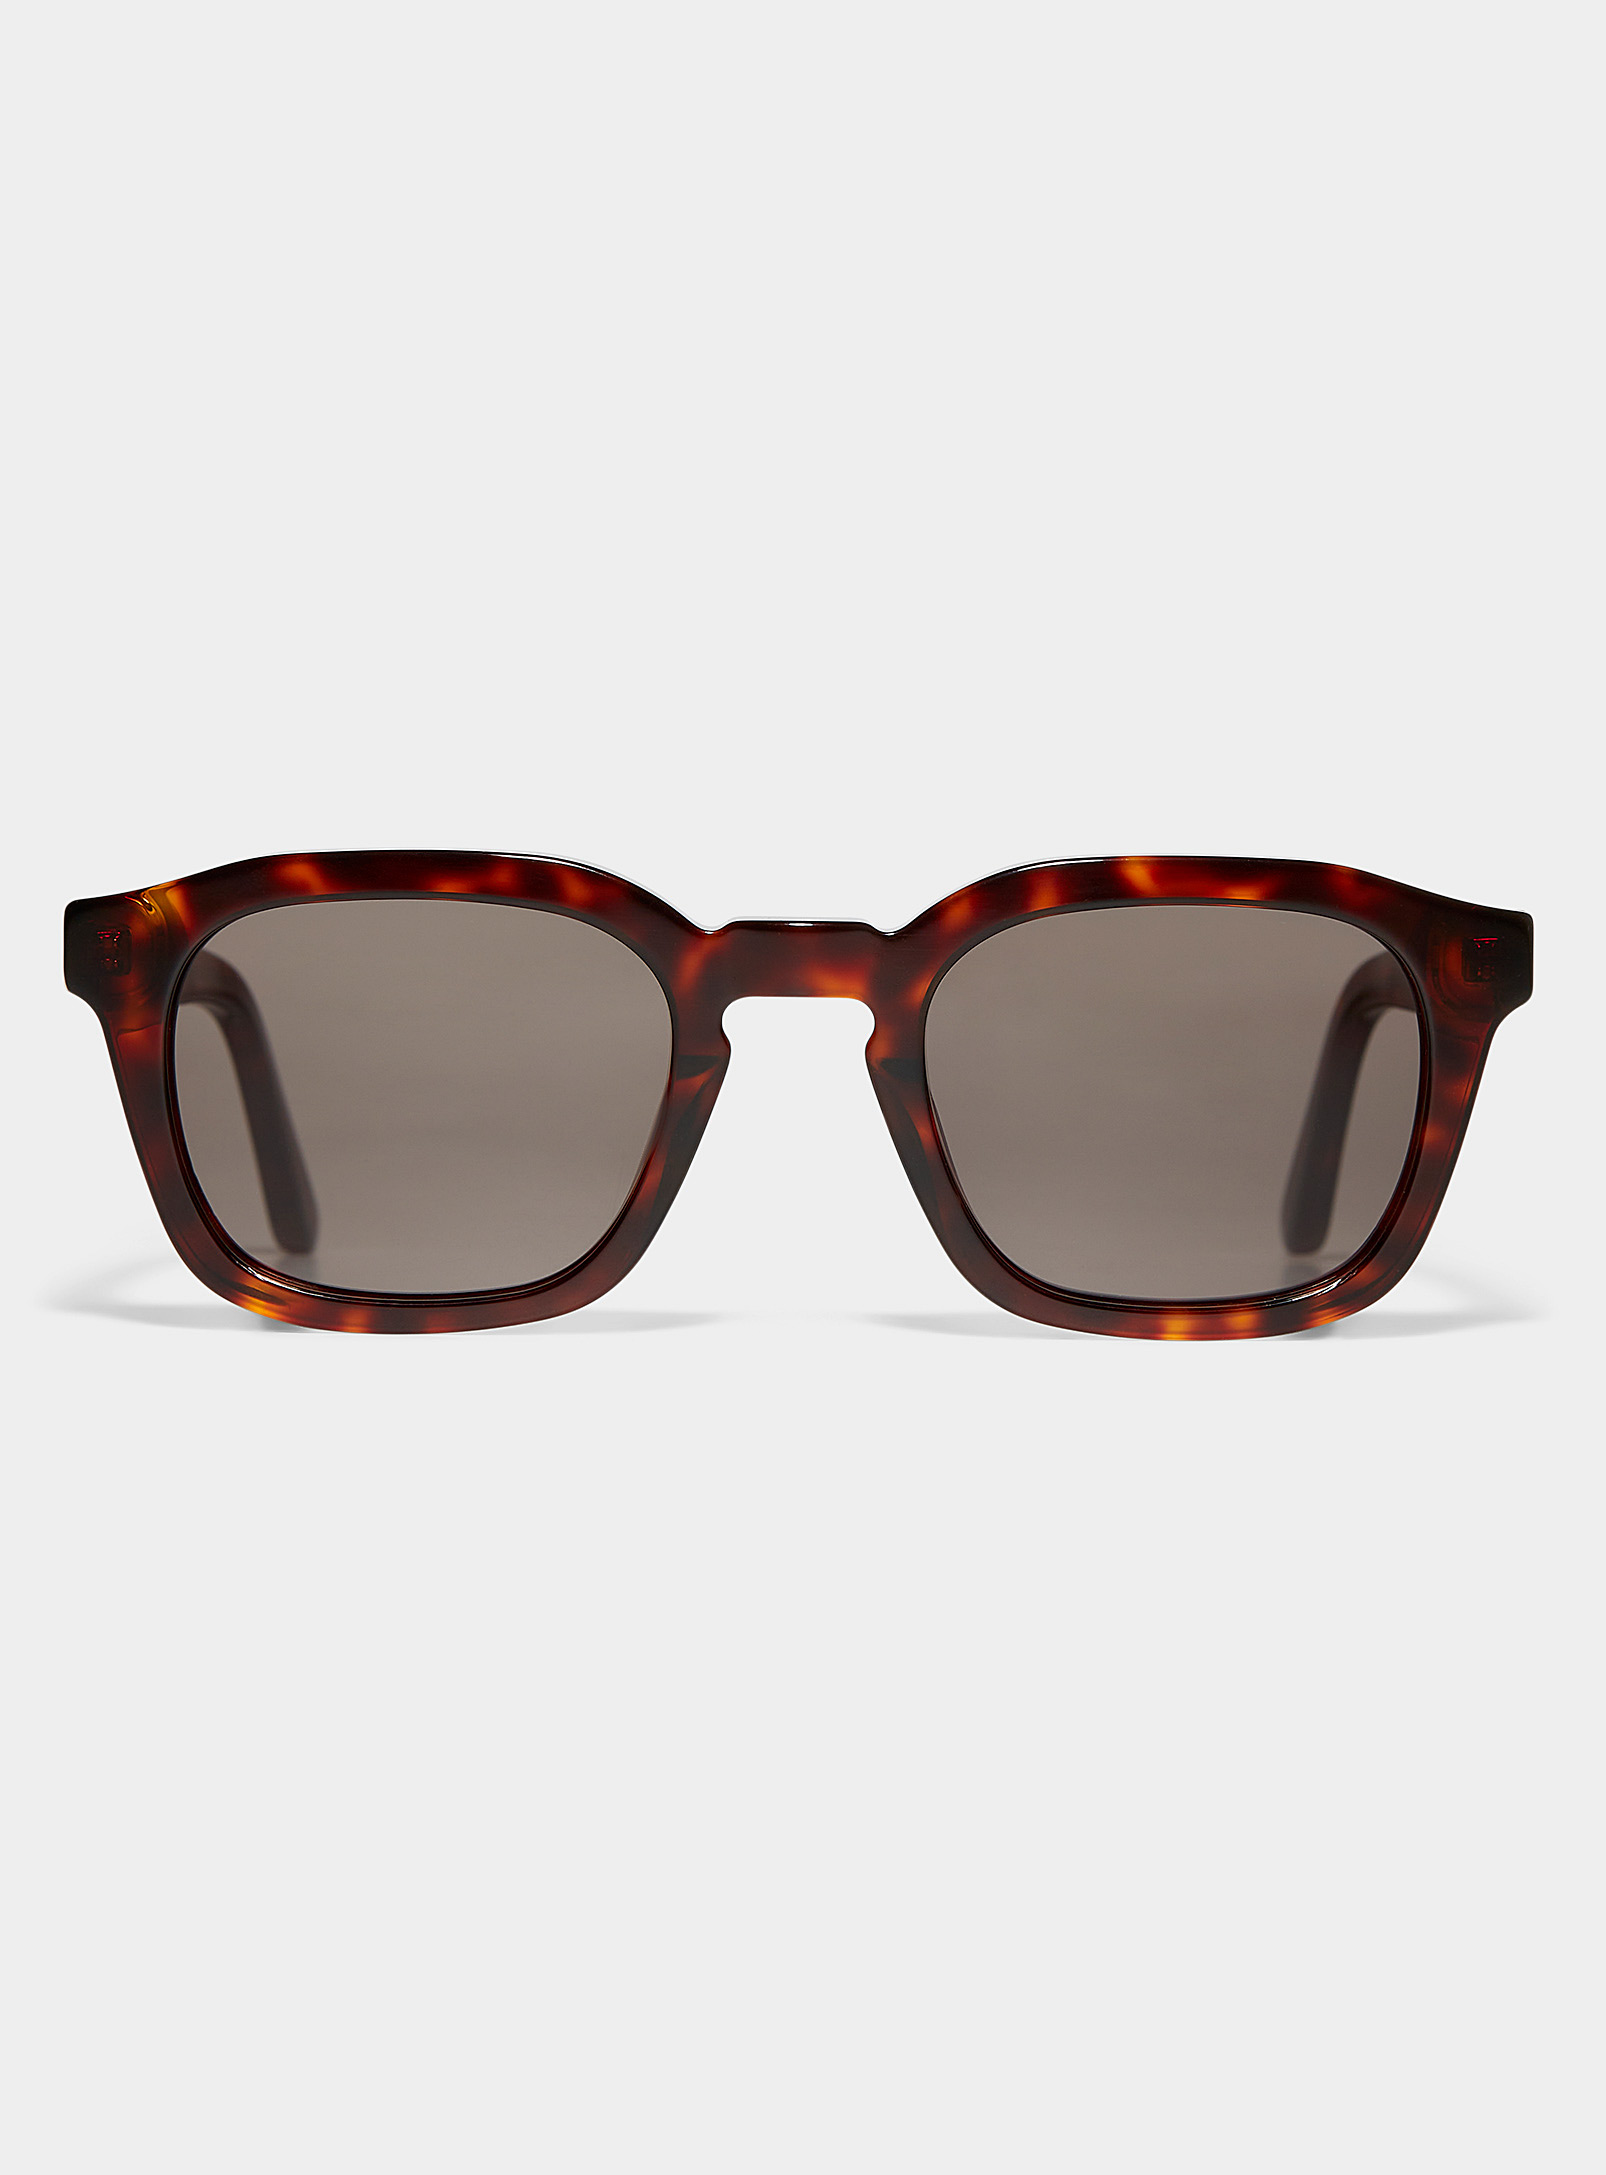 French Kiwis Oscar Square Sunglasses In Brown